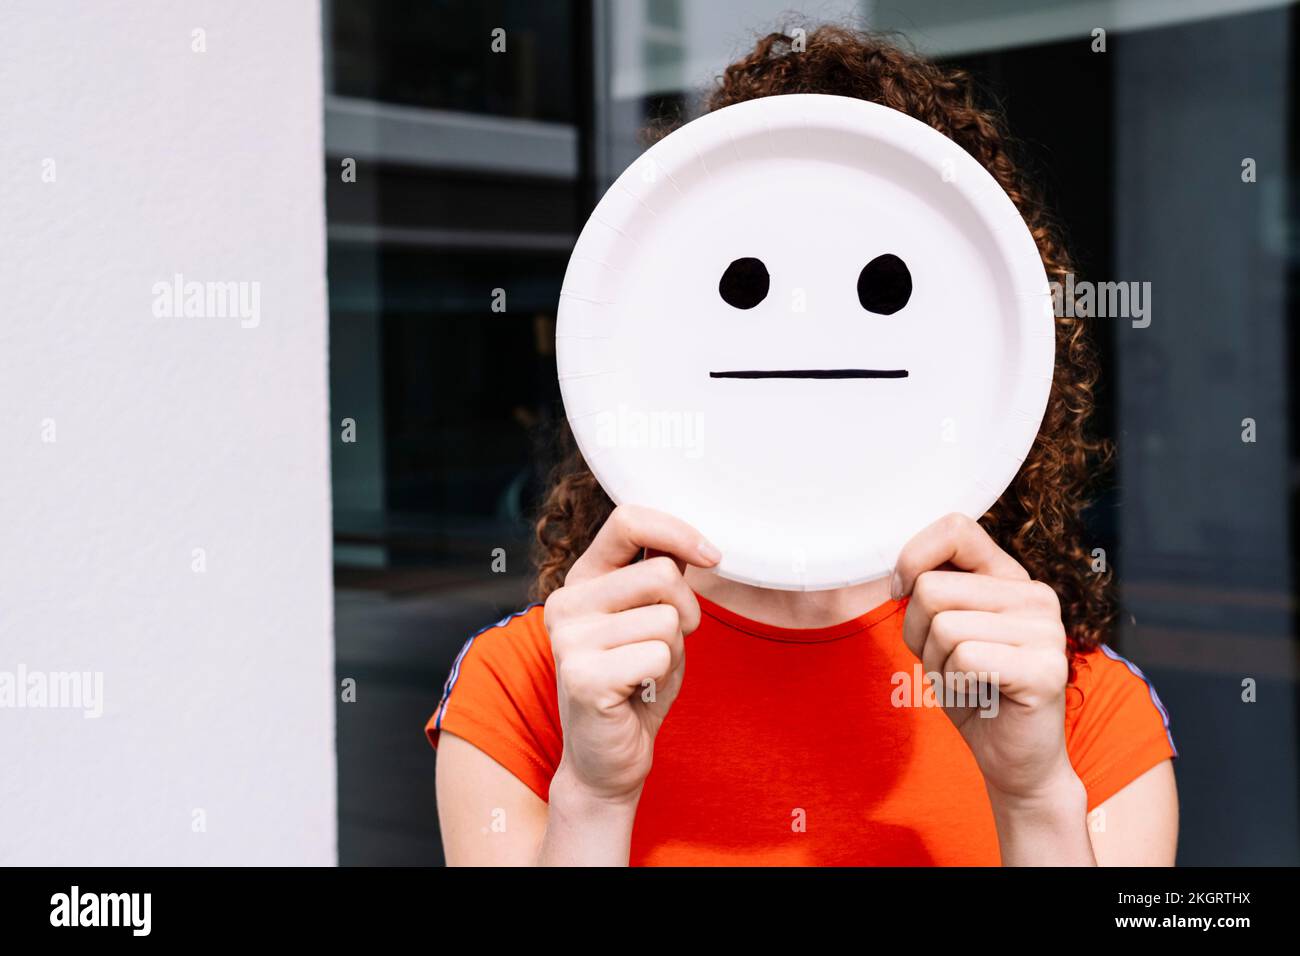 Young woman holding straight smiley emoticon plate over face Stock Photo